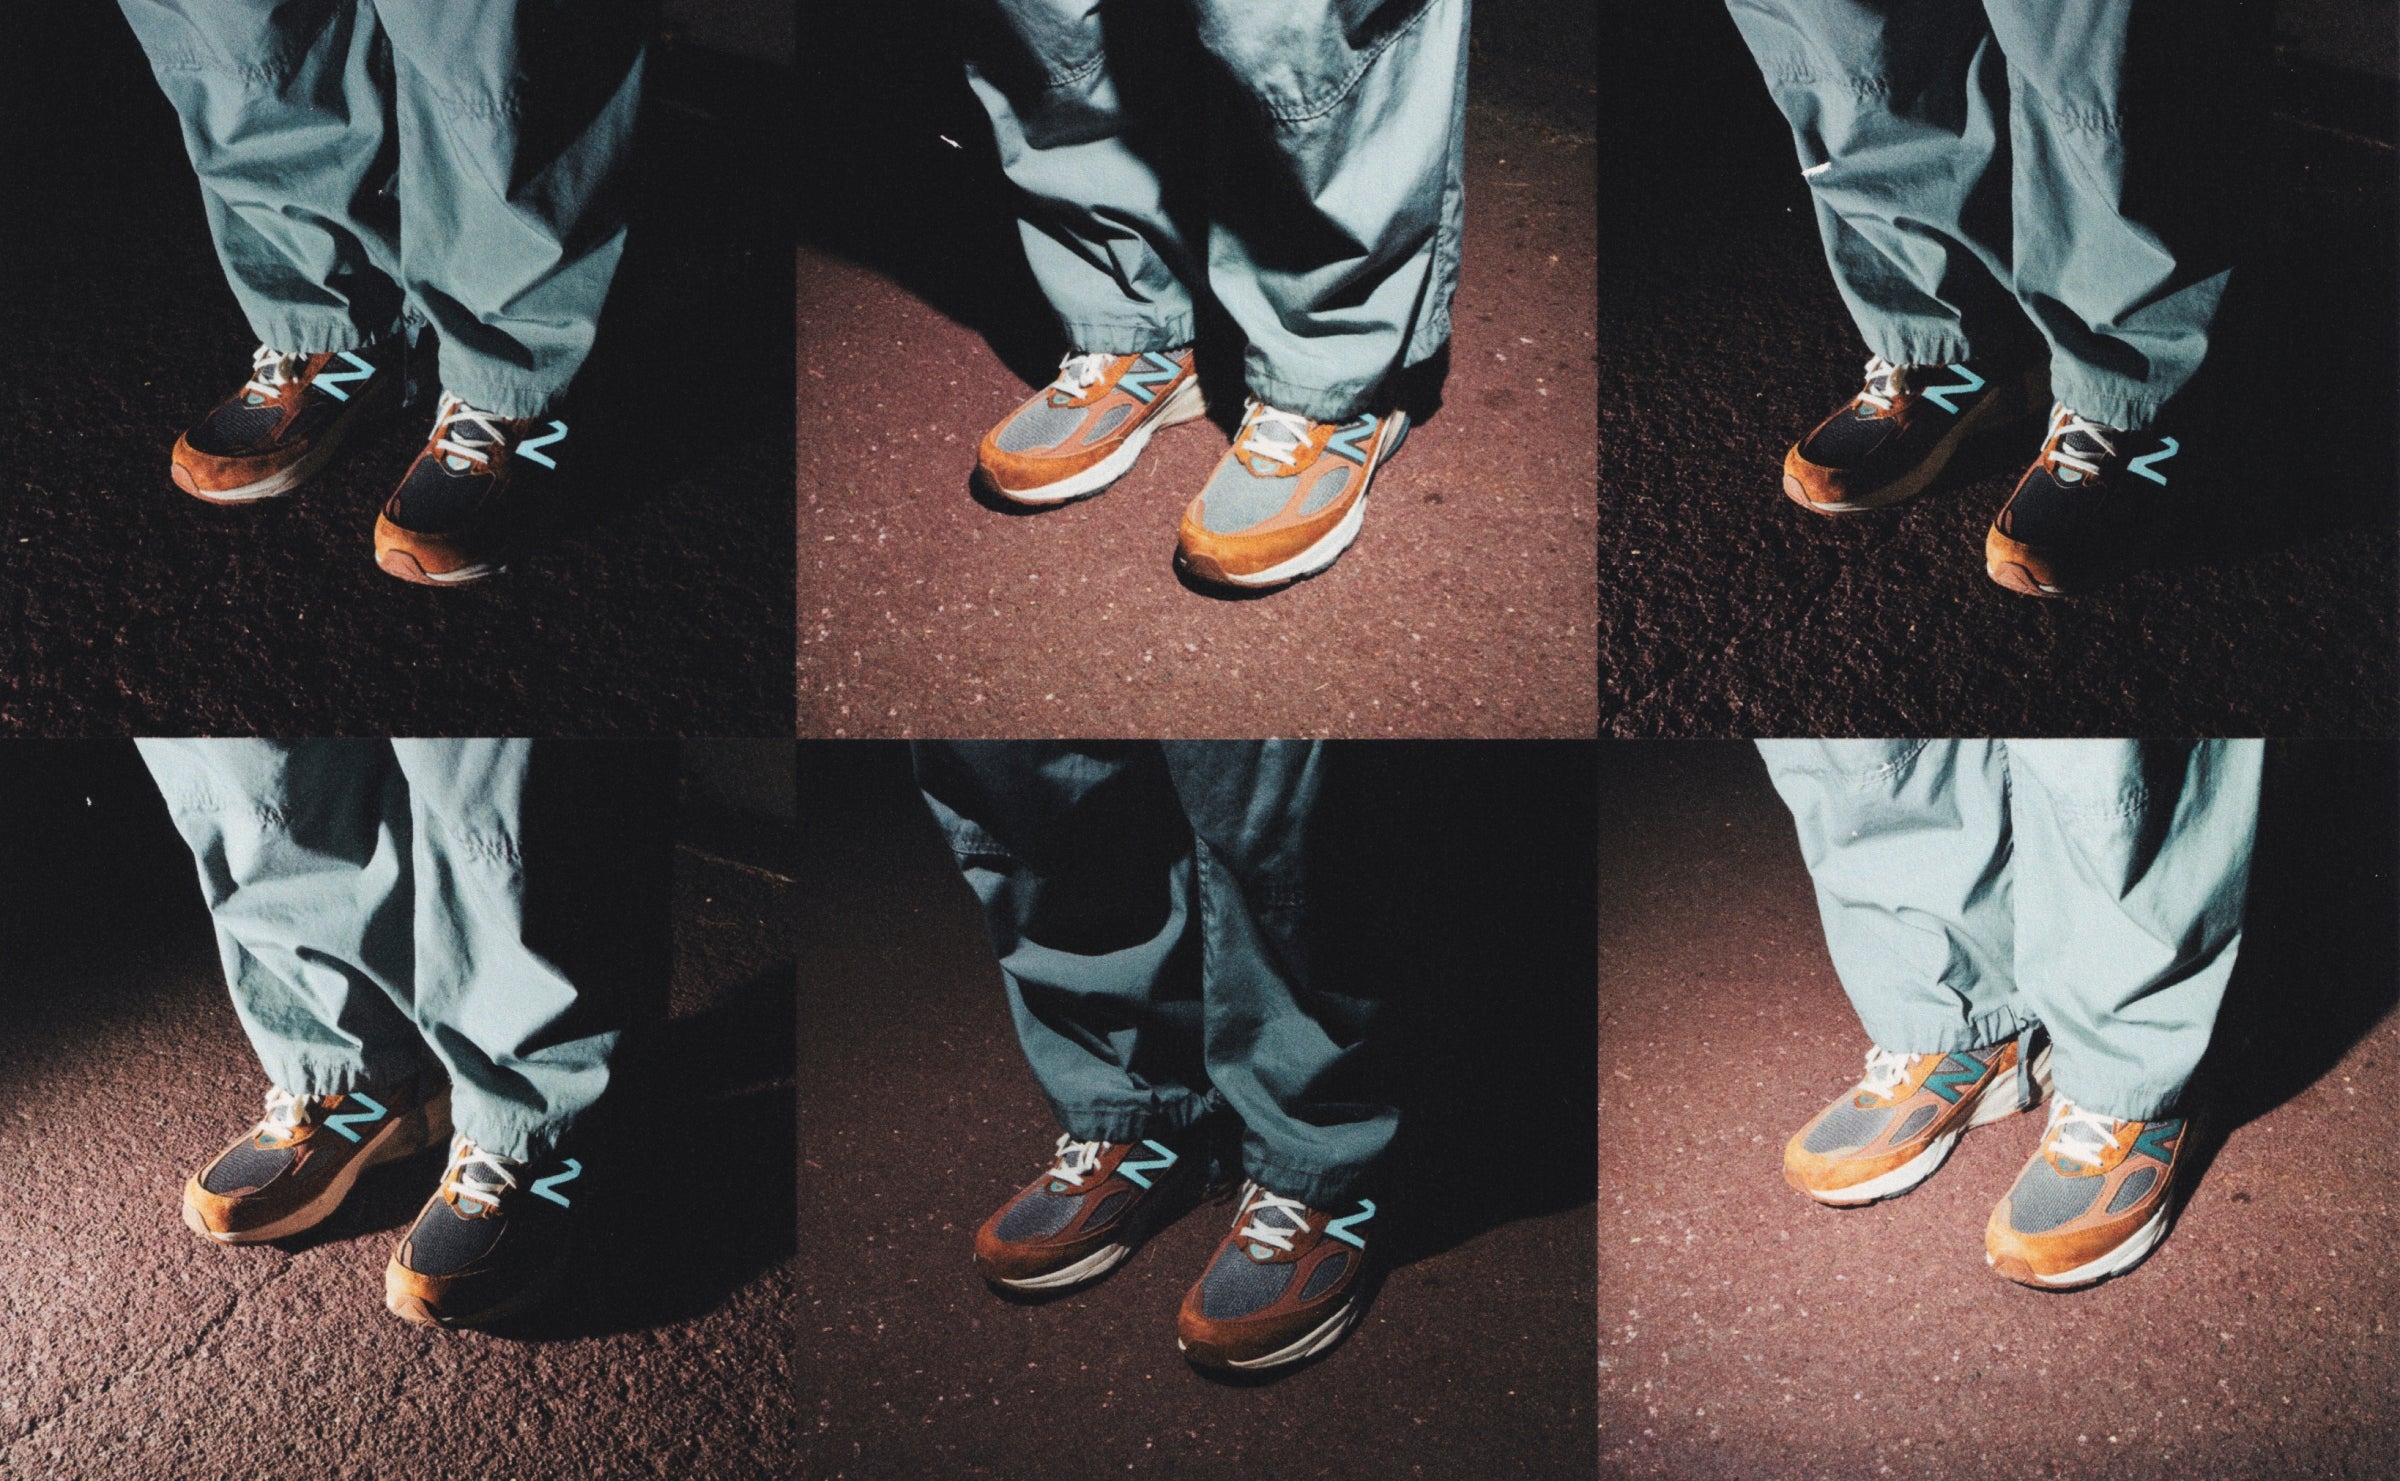 Carhartt WIP x New Balance MADE in USA 990v6 on foot shots showing reflective laces and N logo